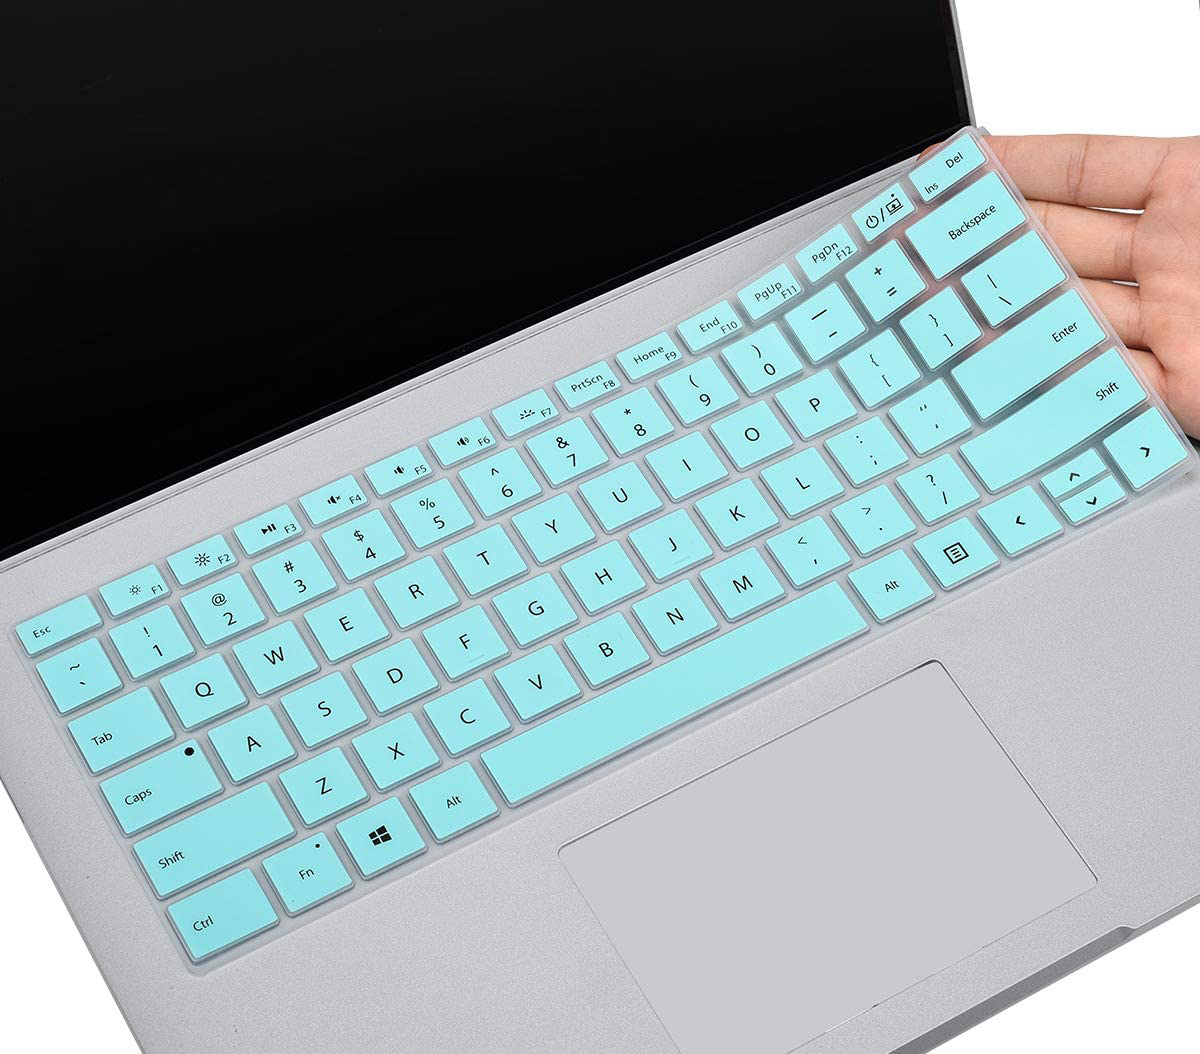 CaseBuy Keyboard Cover for Microsoft Surface Book 2/1 13.5 and 15 inch, Surface Laptop 2 2018, Surface Laptop 2017, Surface Book Accessories, Mint